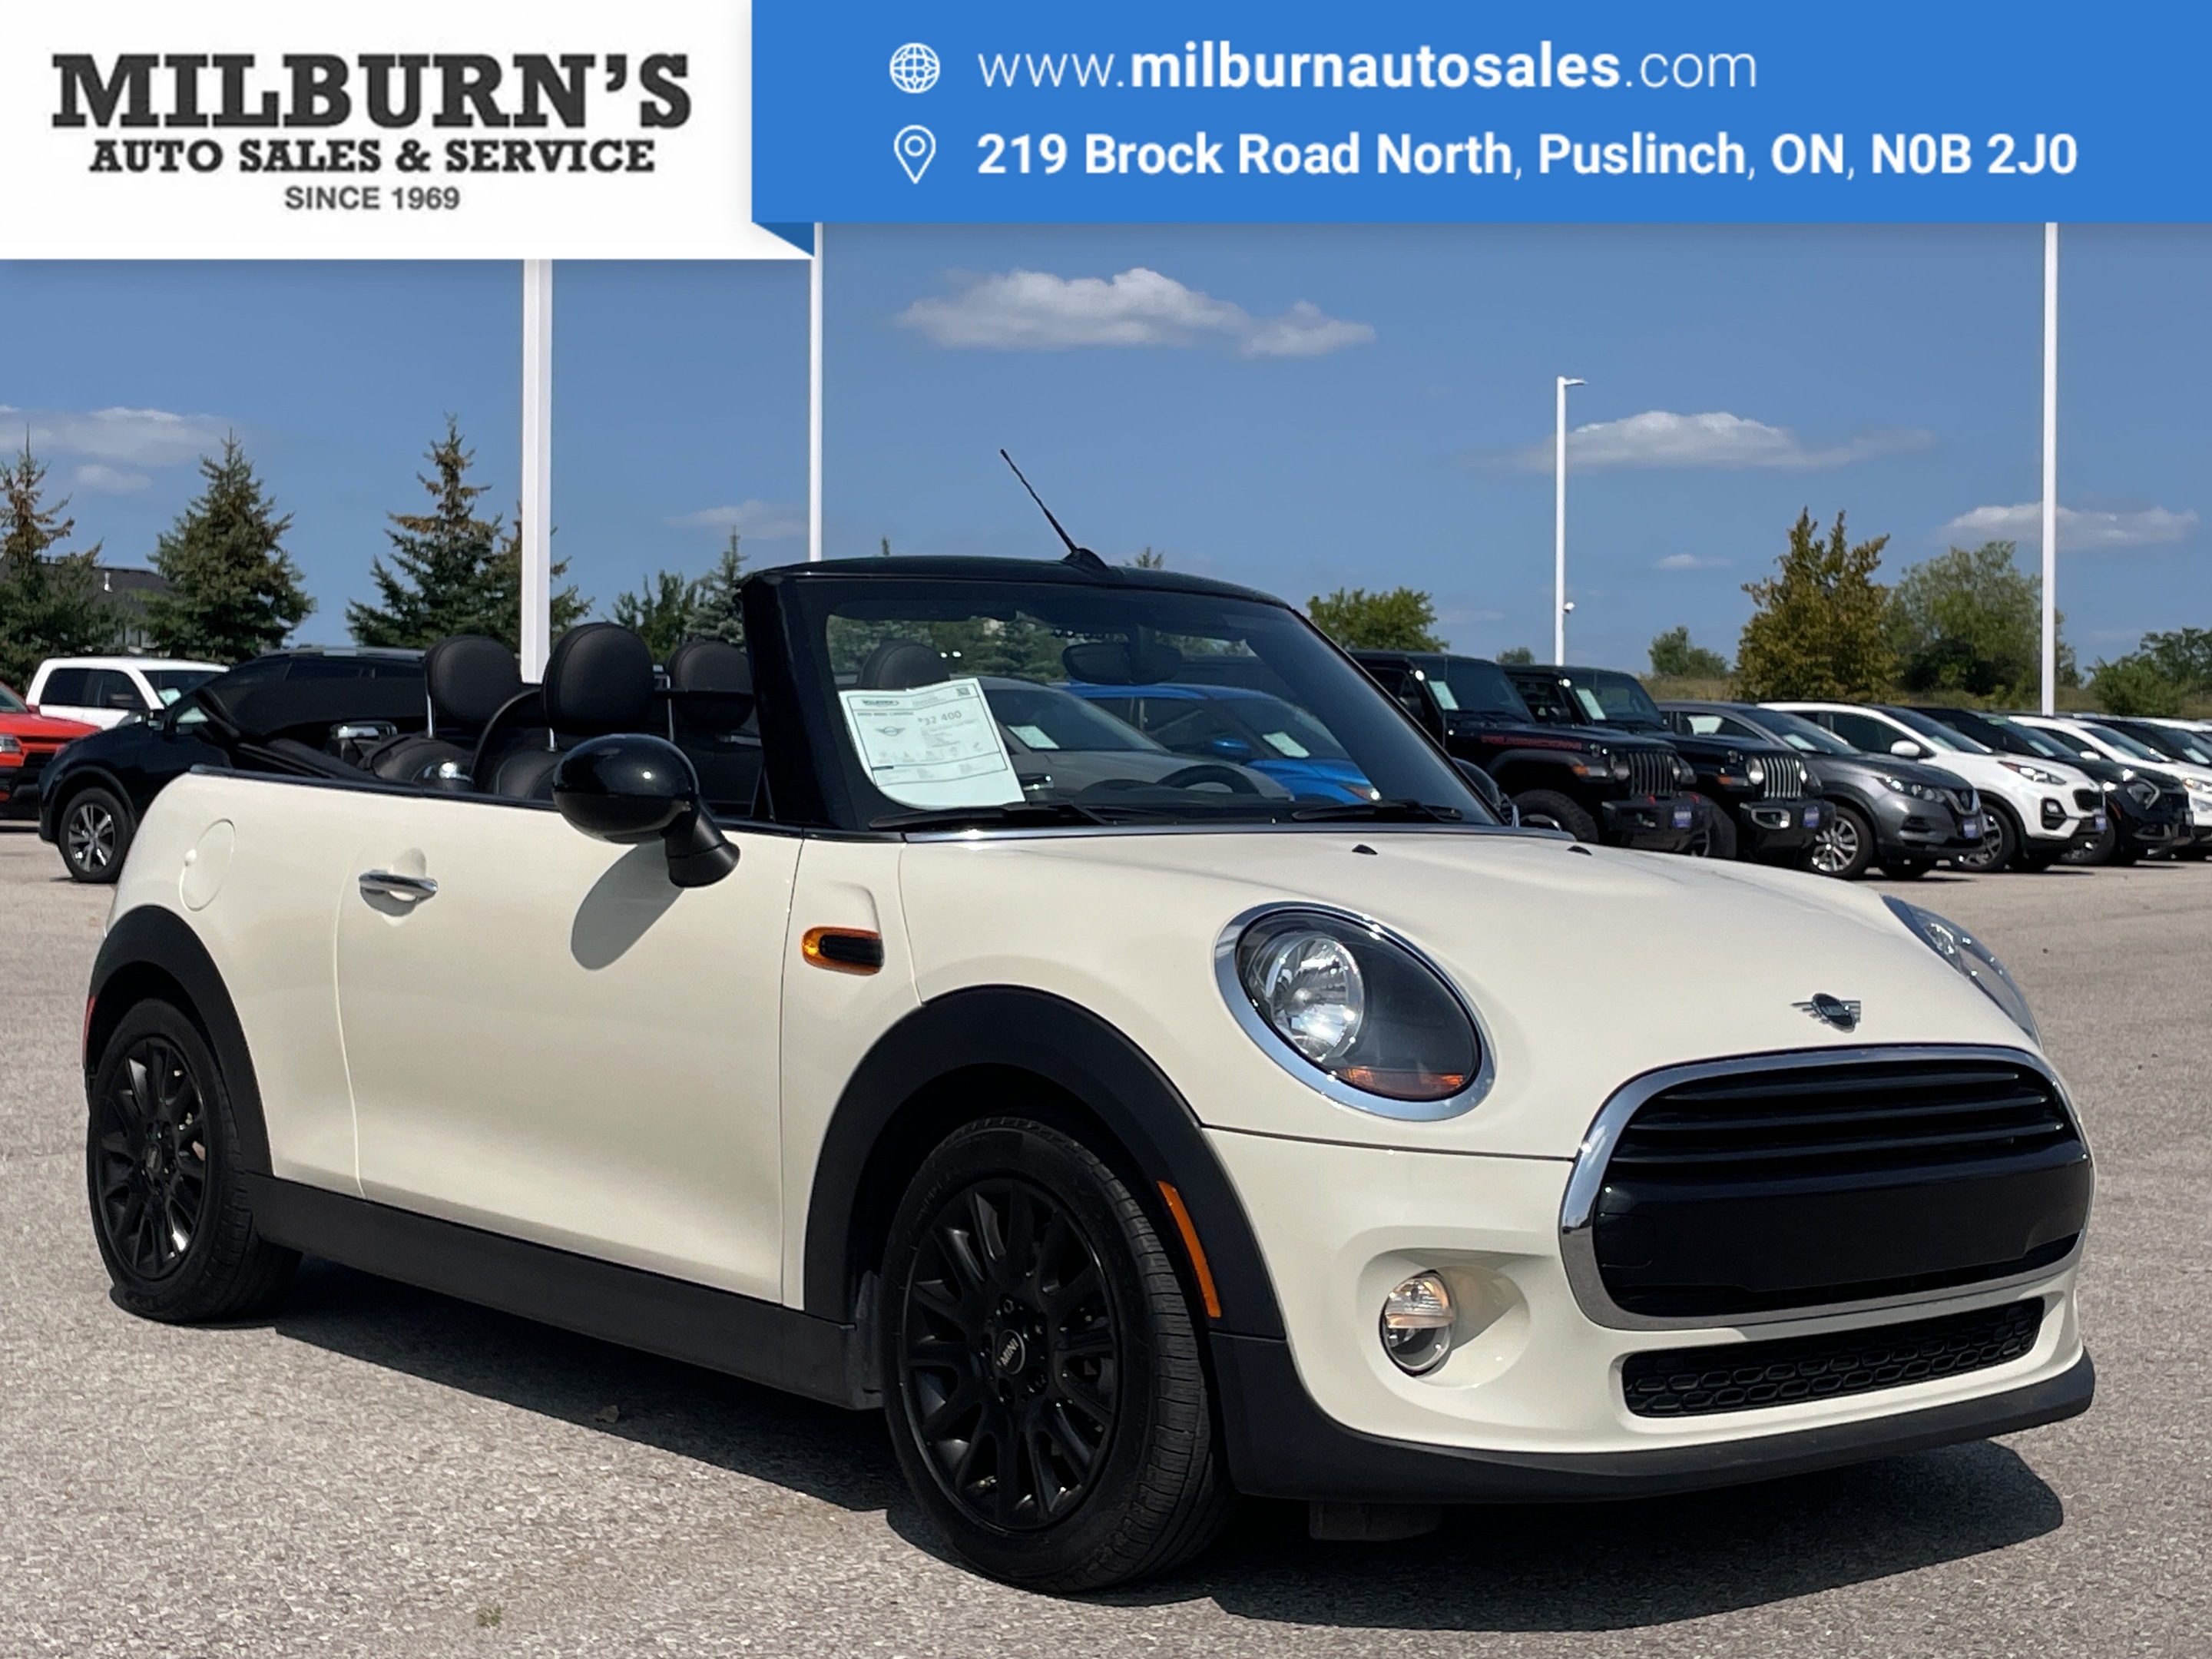 2019 MINI Convertible Cooper Convertible / Leather / Heated Seats